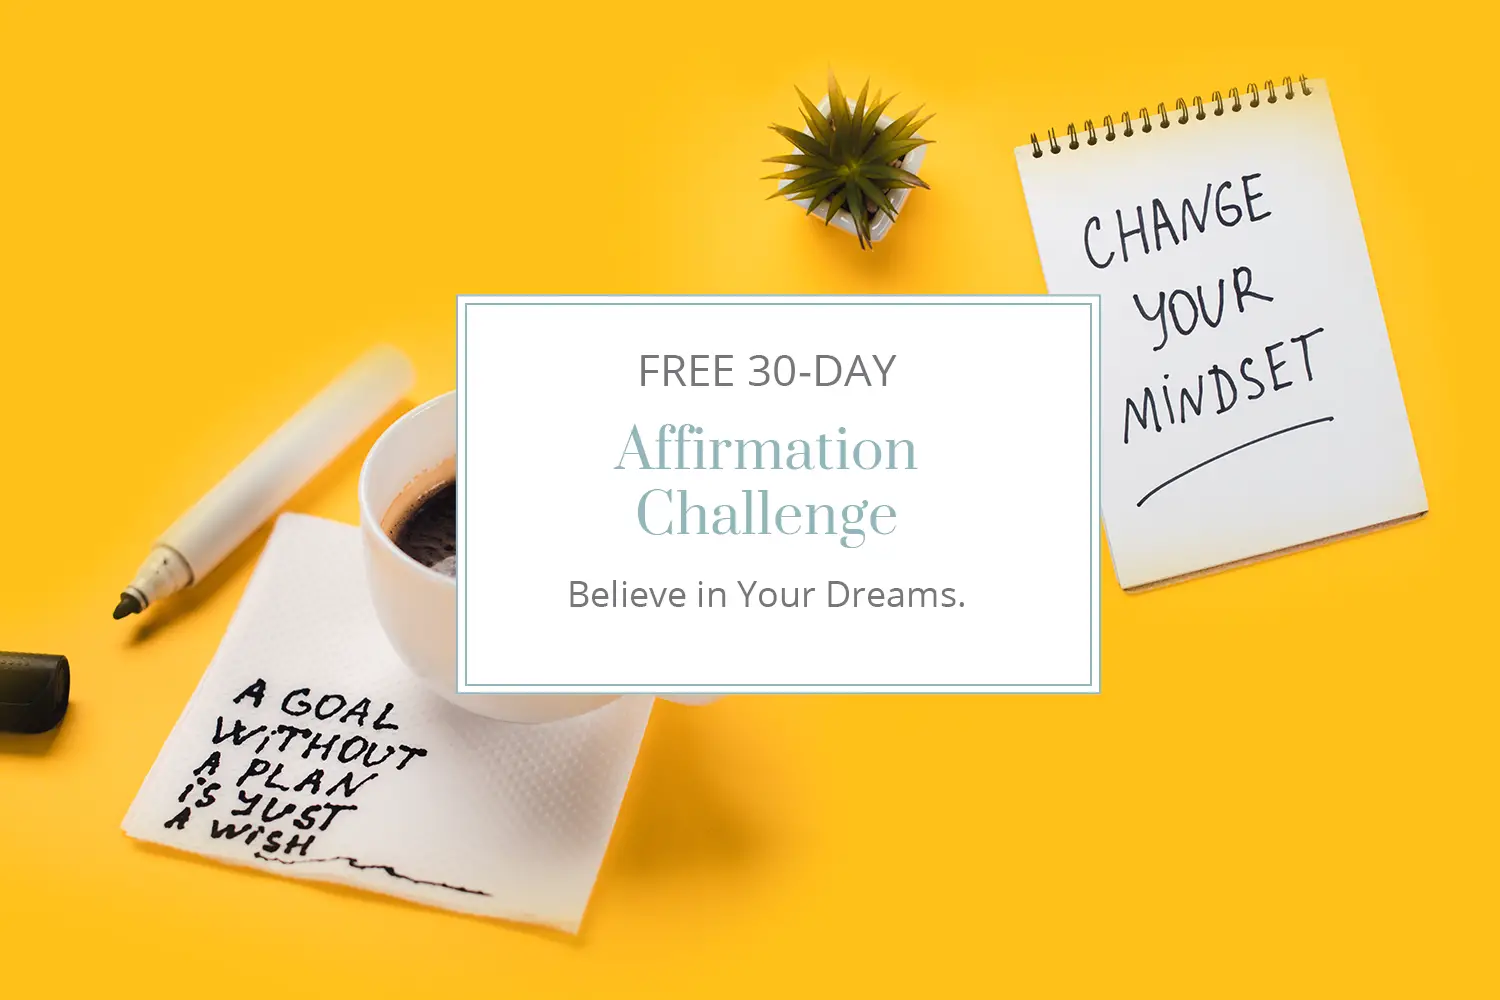 30 Days. 30 Affirmations. Take the Free 30-Day Affirmation Challenge